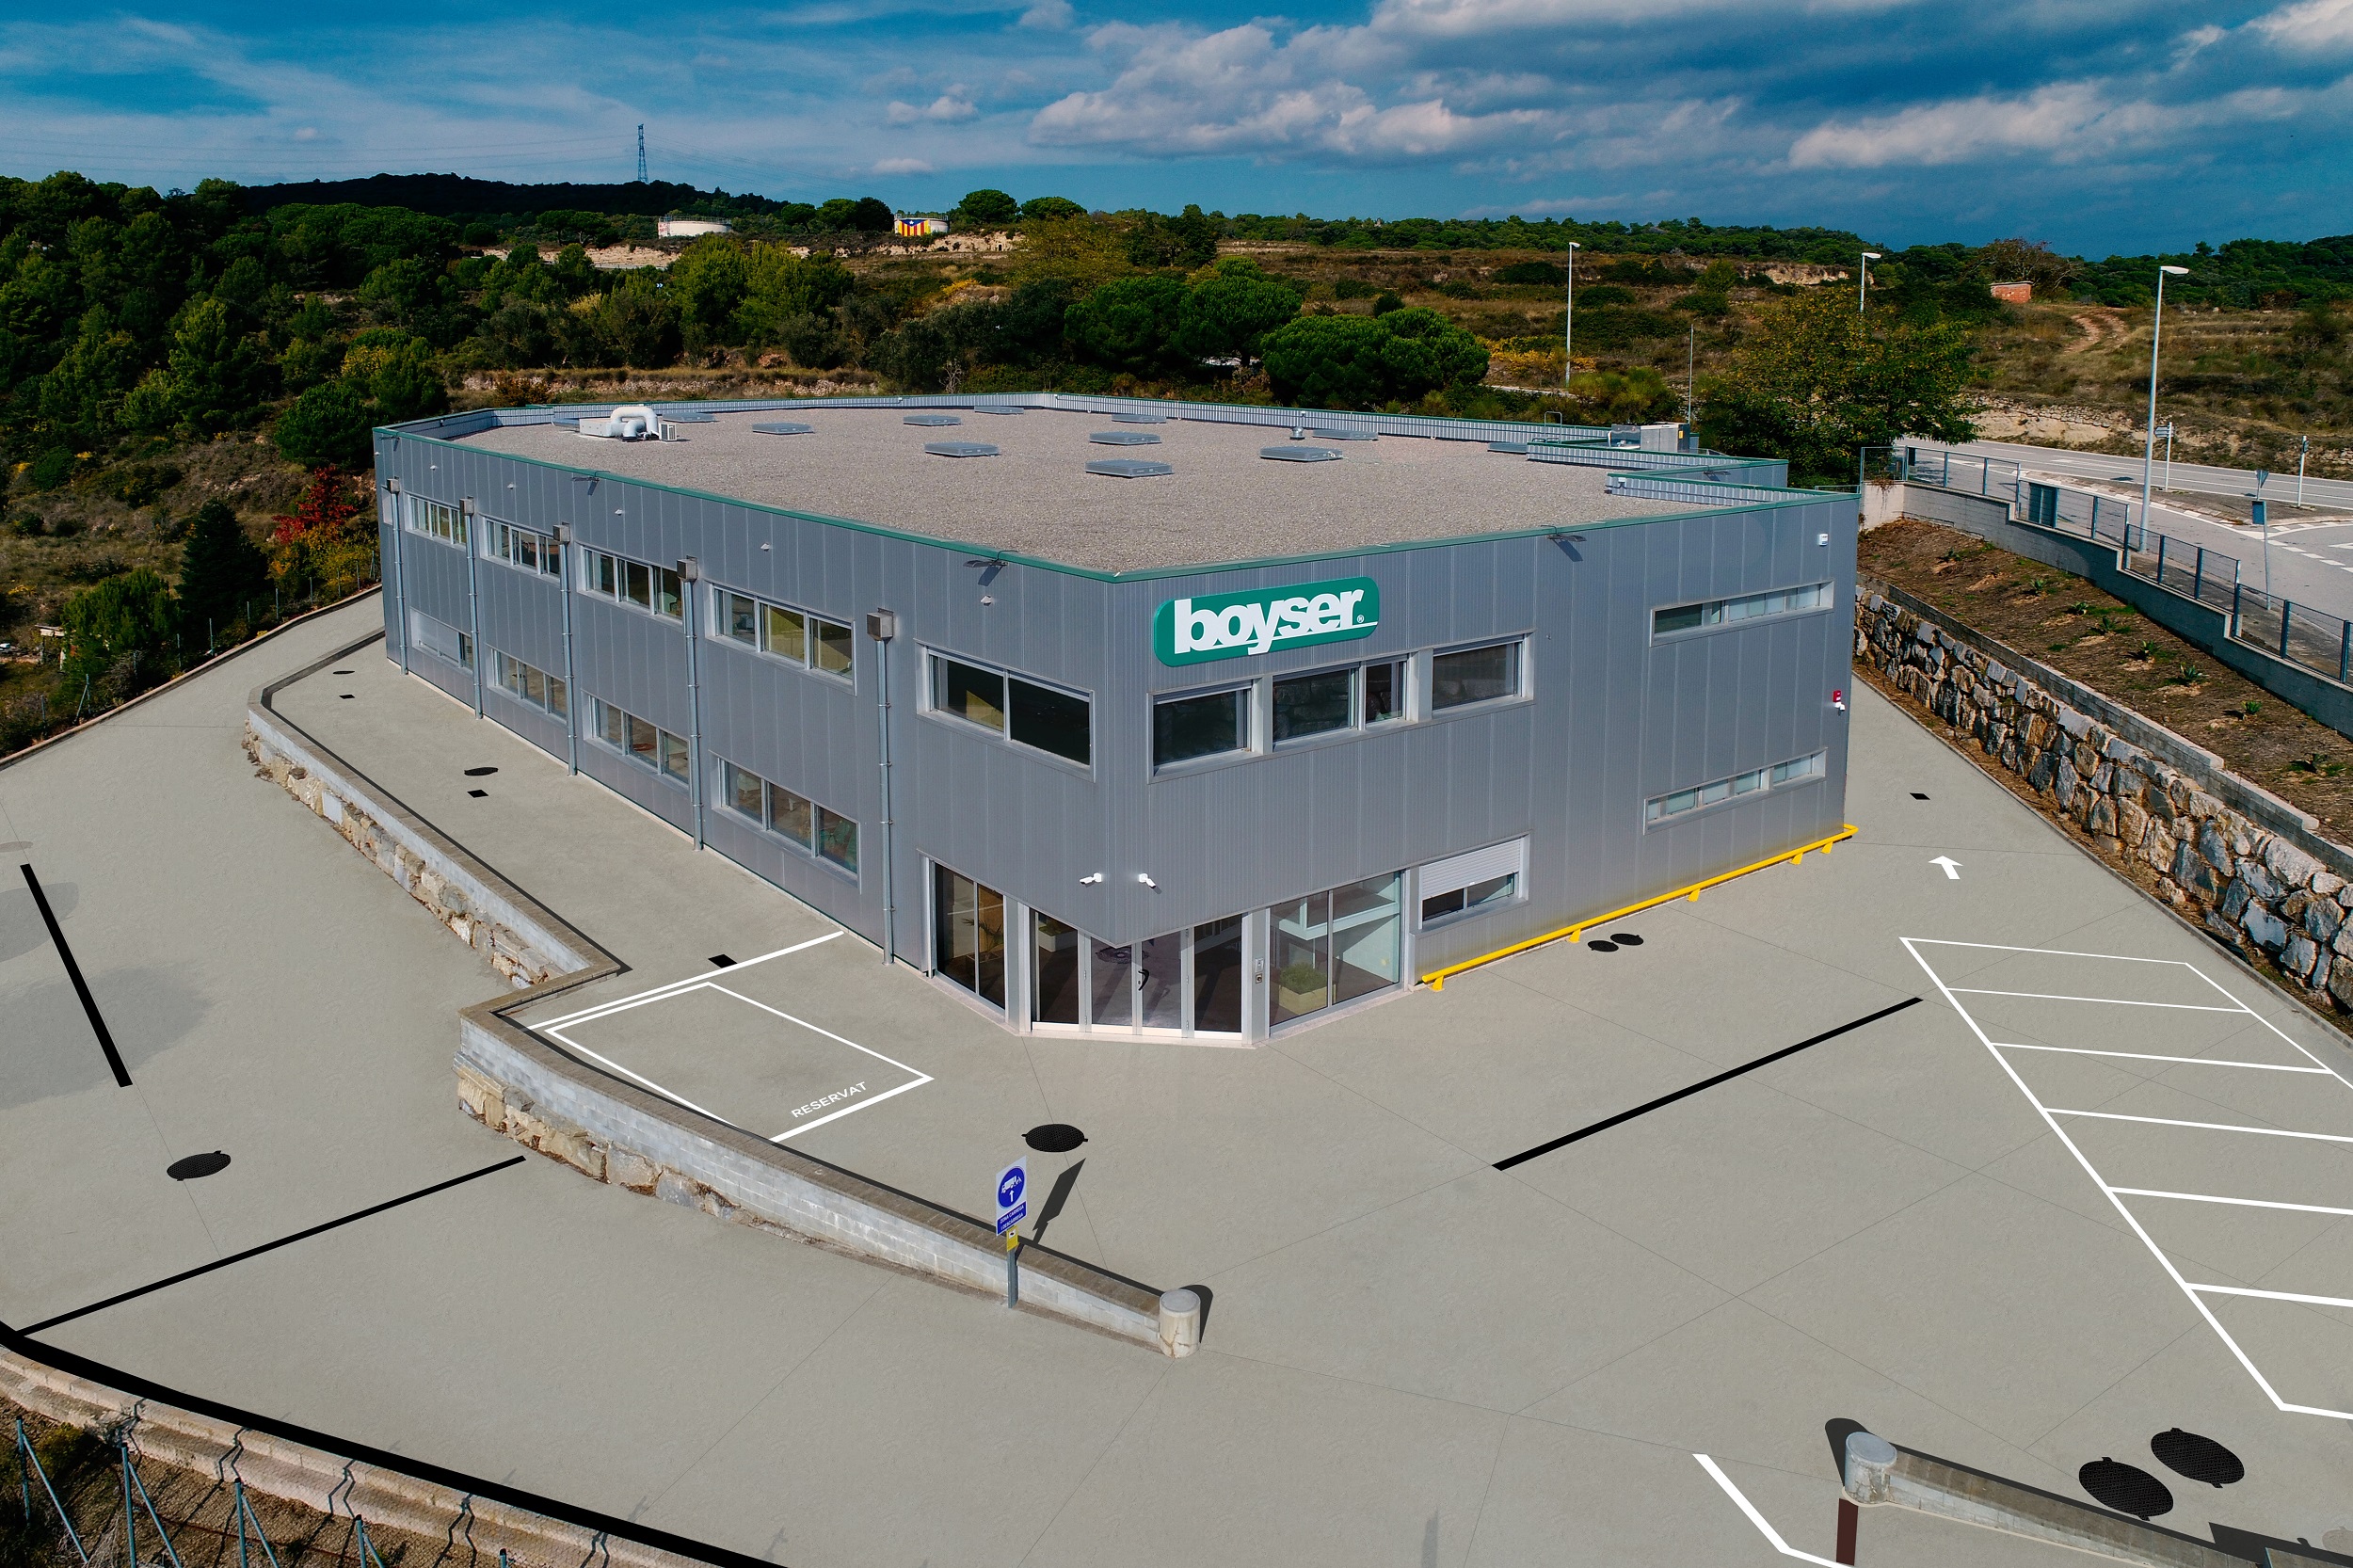 The Bombas Boyser manufacturing facility is located at Sant Feliu De Codines, north of Barcelona.